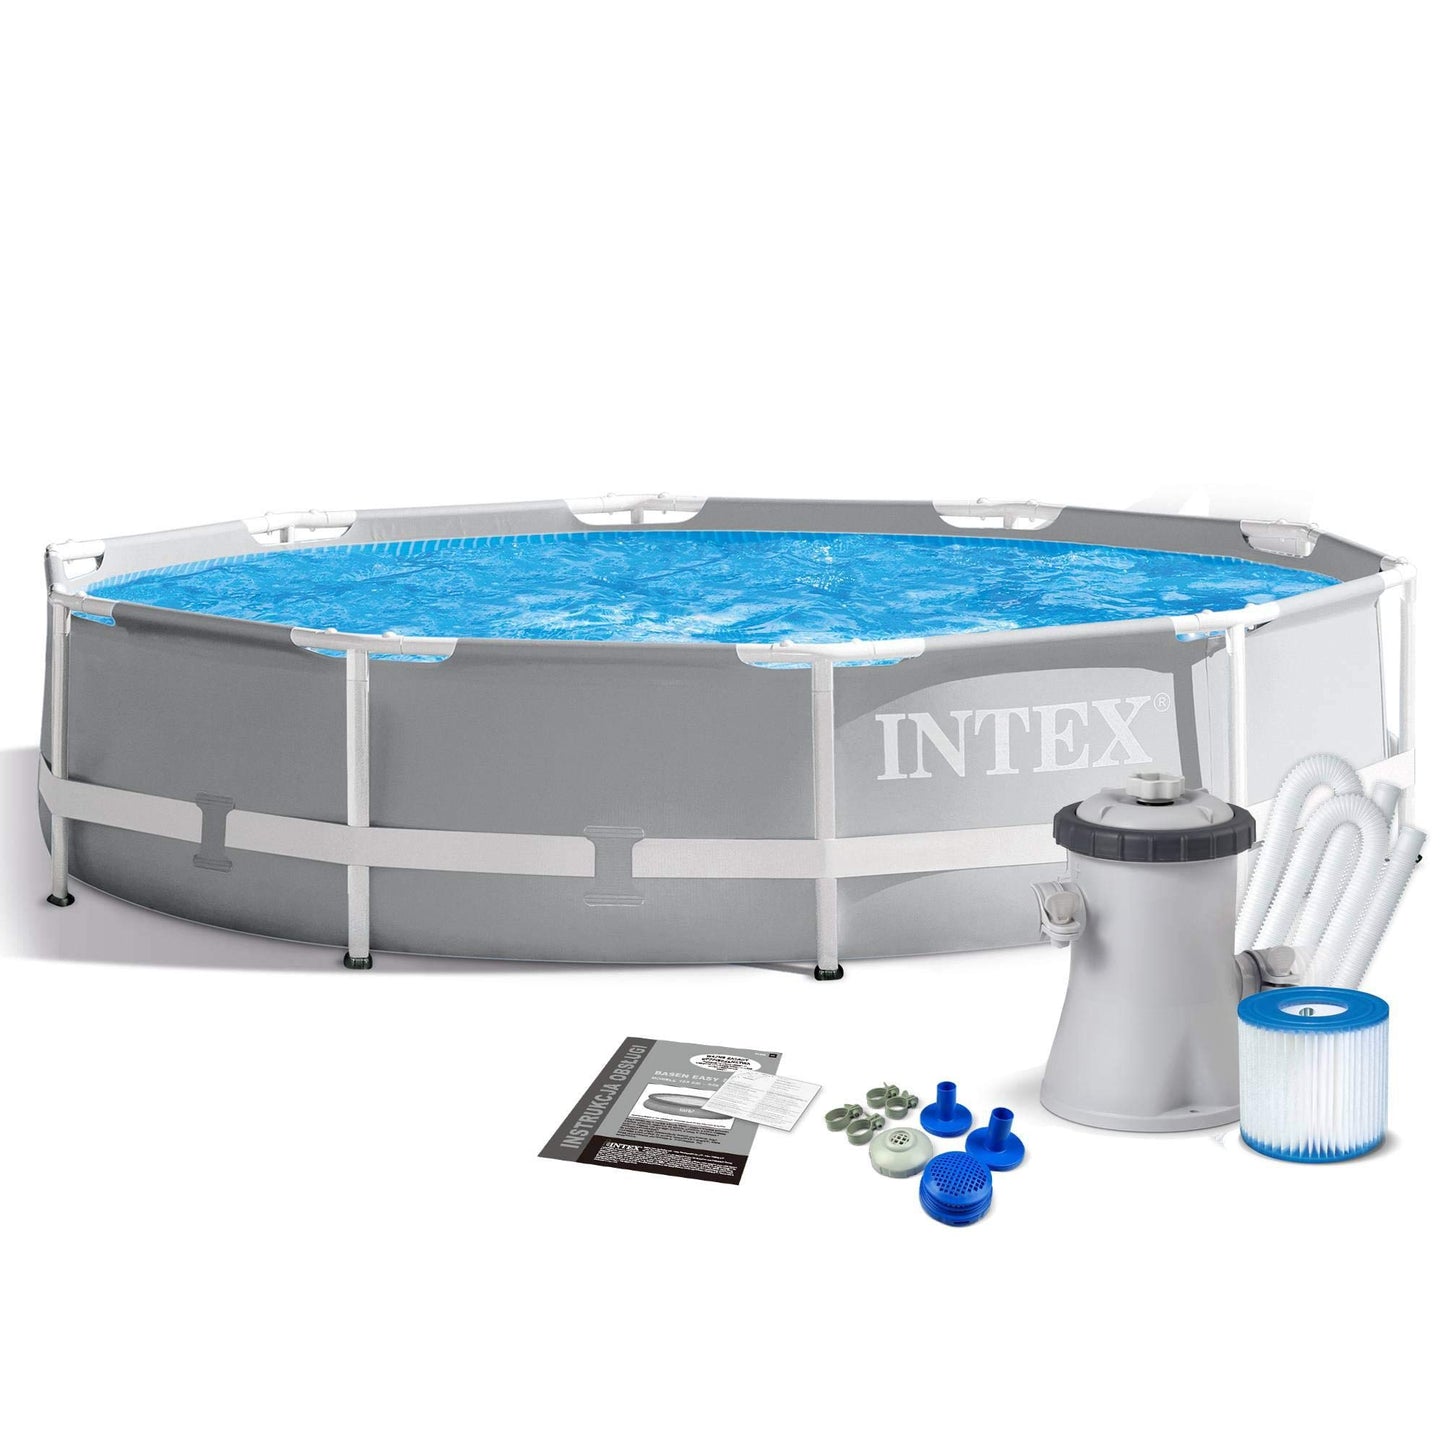 INTEX Prism Frame Pool With Filter Pump For Kids